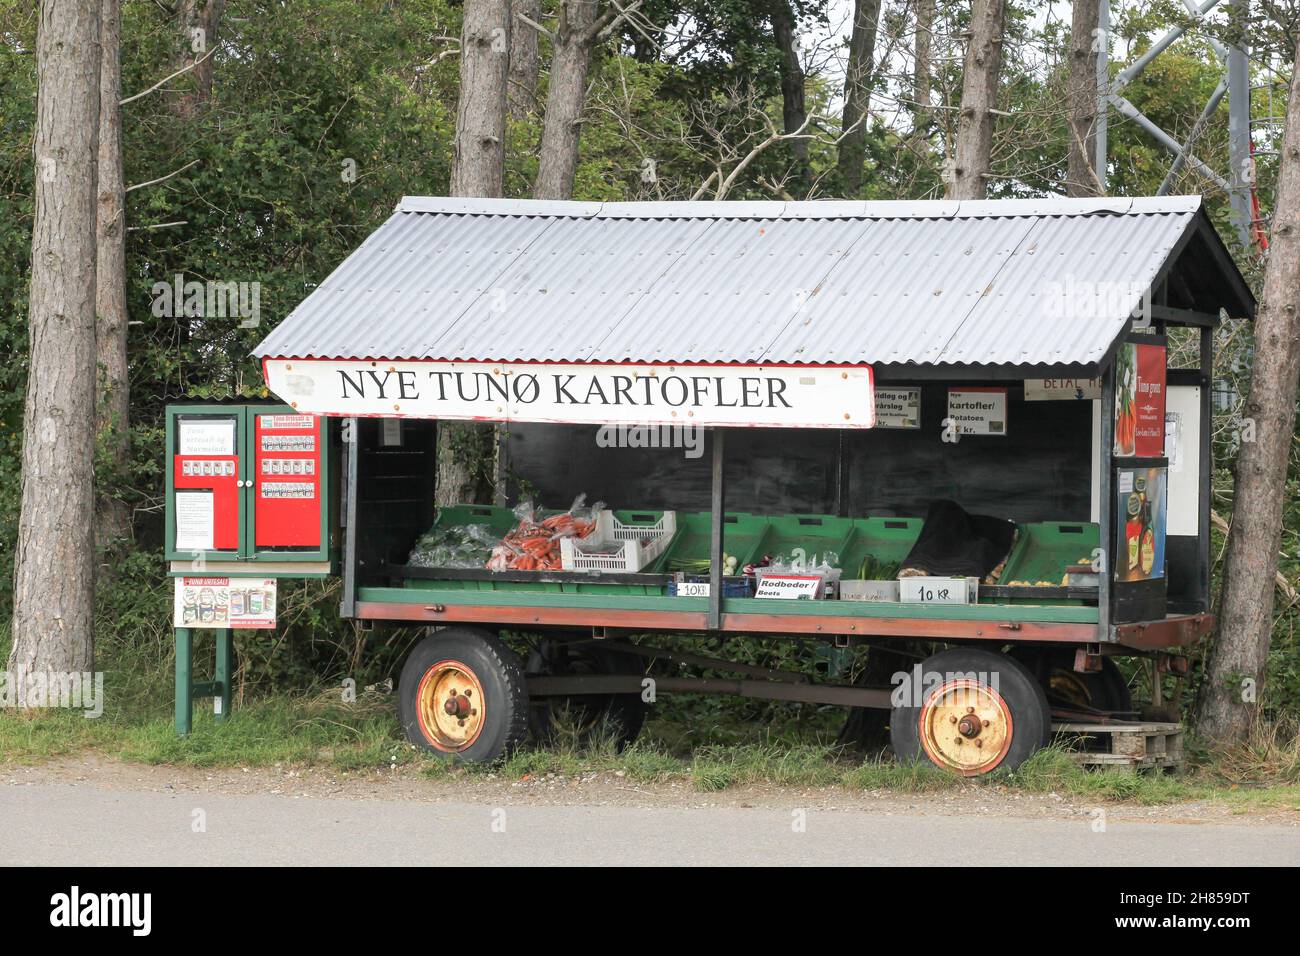 Tuno island, Denmark - July 30 2020: Purchase and payment of fruits and vegetables in self-service on a trailer, Tuno island, Denmark Stock Photo